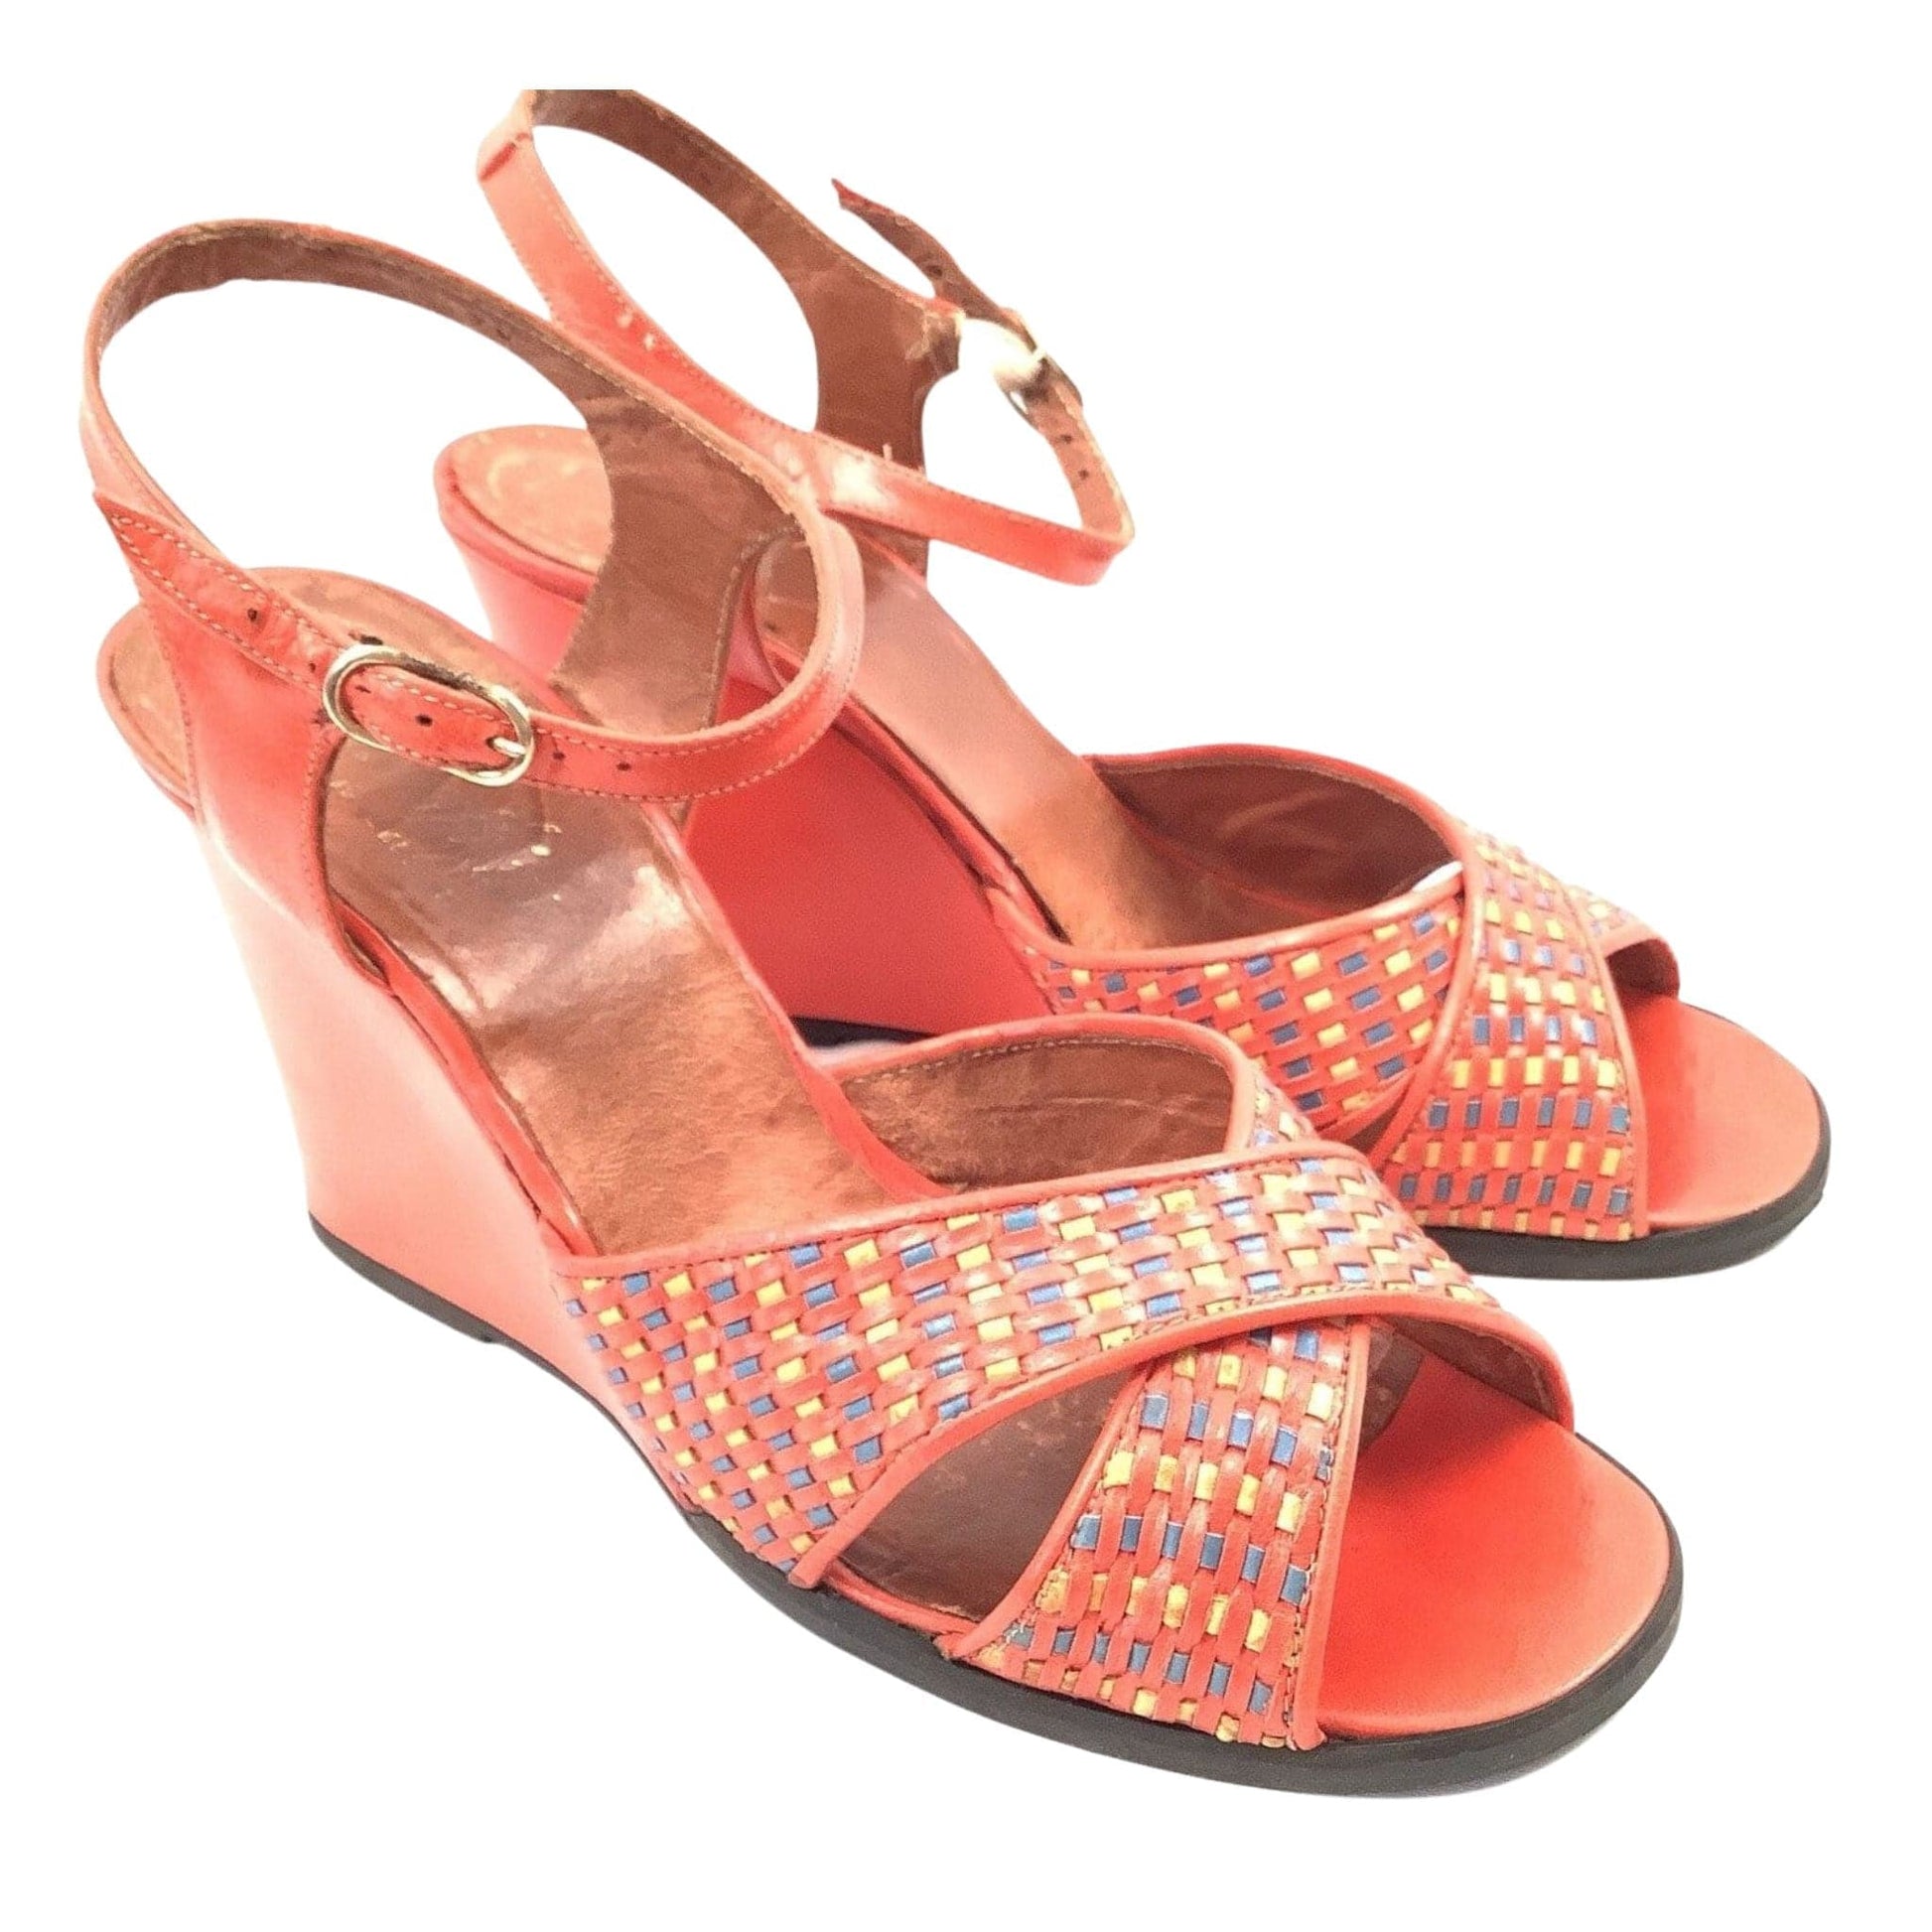 Woven Leather Wedge Sandals 7.5 / Multi / Vintage 1980s